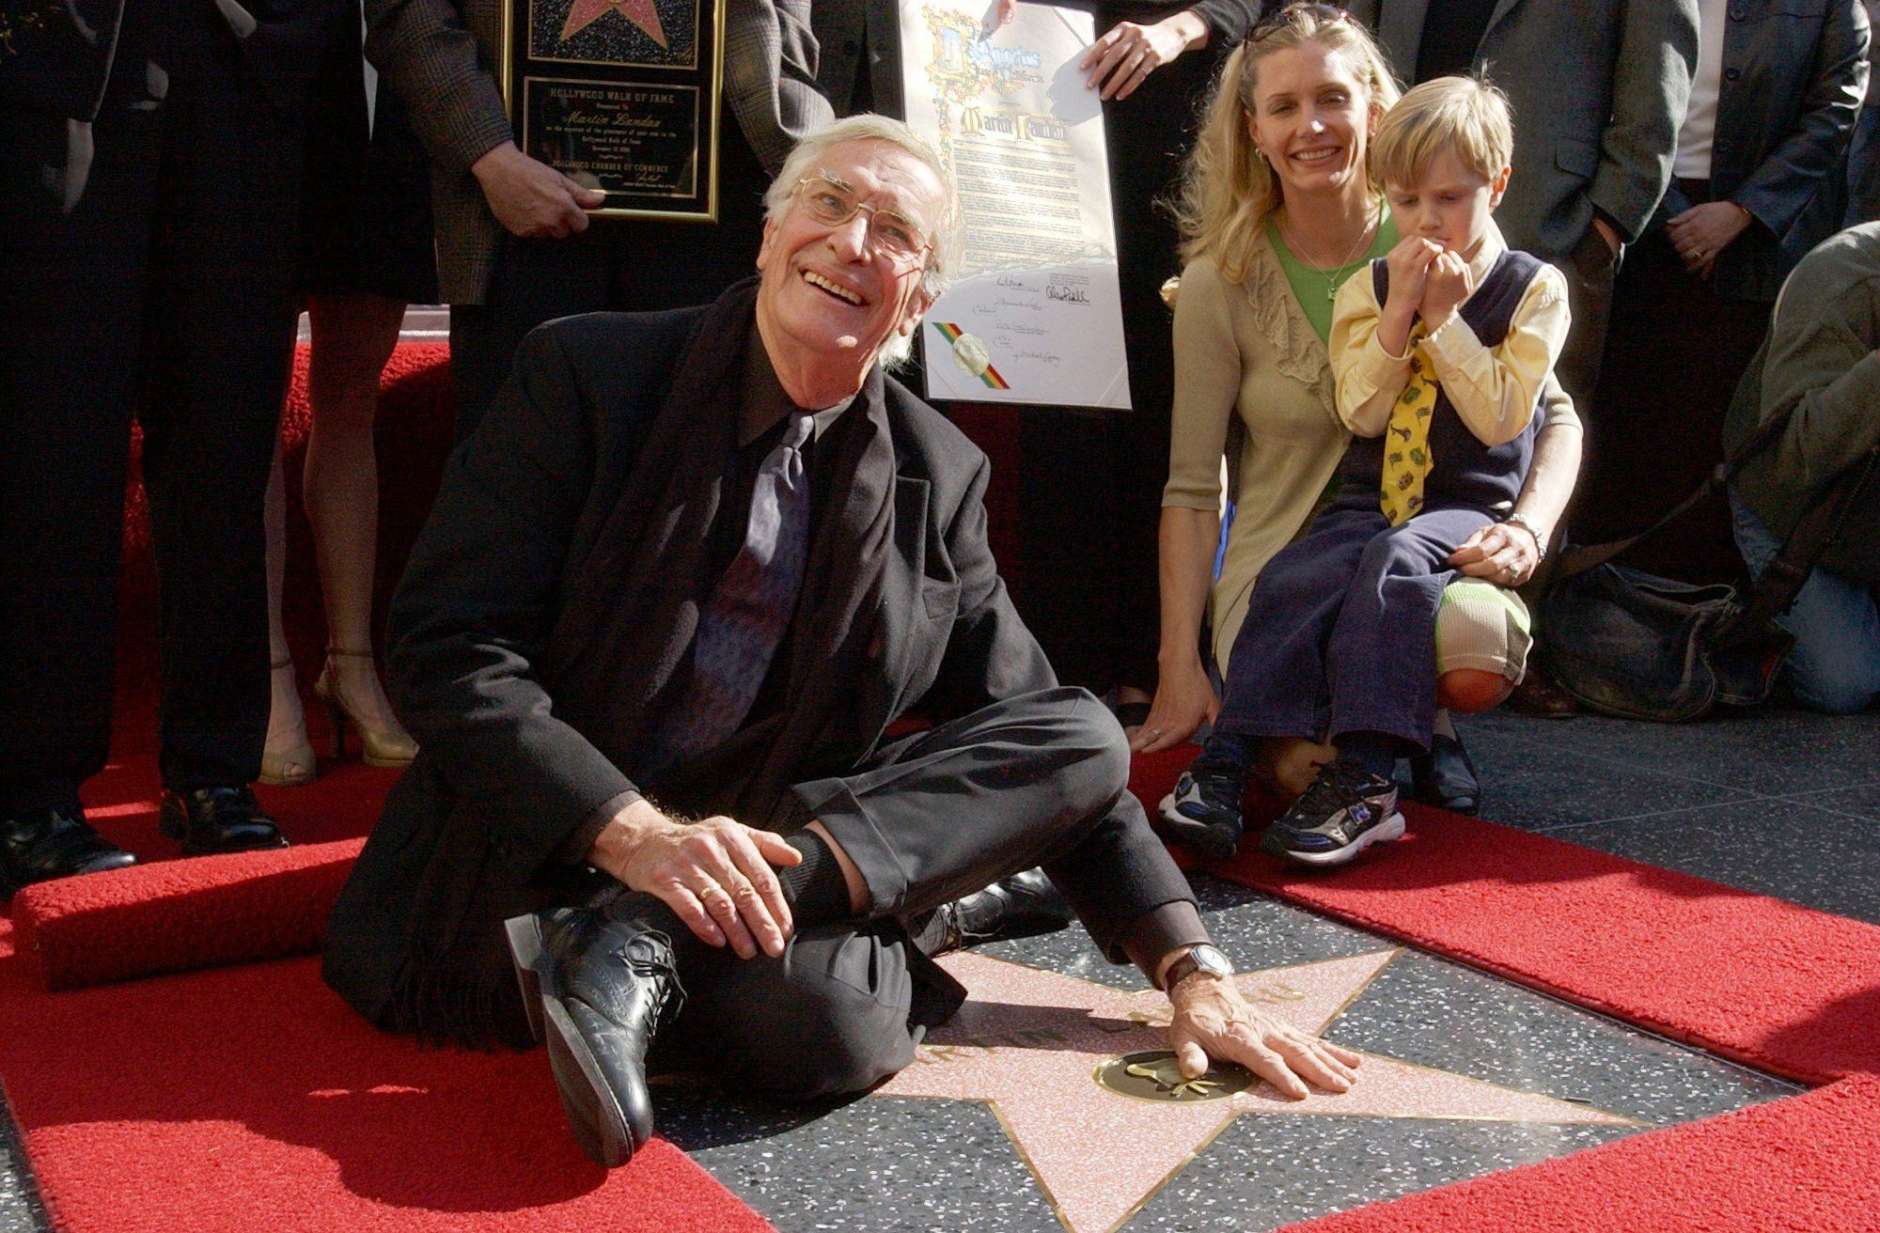 Actor Martin Landau, left, poses for photographers on his star on the Hollywood Walk of Fame, Monday, Dec. 17, 2001, in Los Angeles. Landau, who was honored with the 2,187th star on the wold famous walk, has had an acting career spanning more than four decades in nearly 90 films. Pictured to Landau's right are friend Gretchen Becker and Landau's godson Dylan Becker. (AP Photo/Rene Macura)